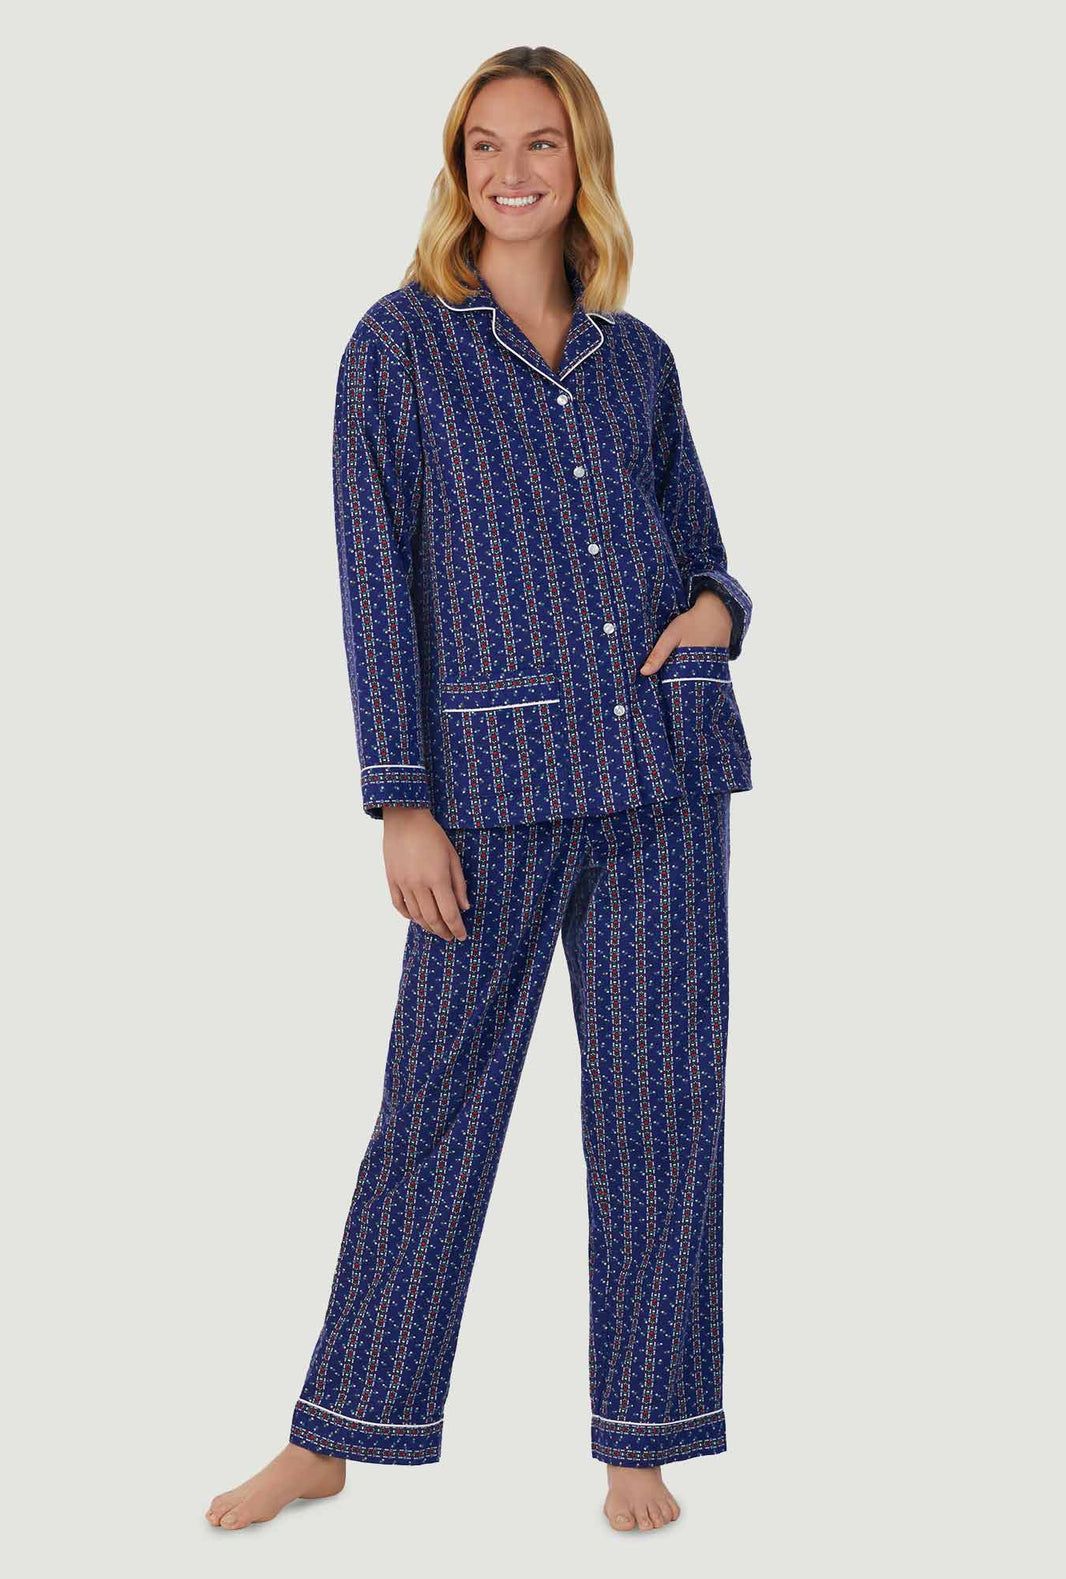 Lanz of Salzburg | Traditional Flannel Nightgowns and Pajamas